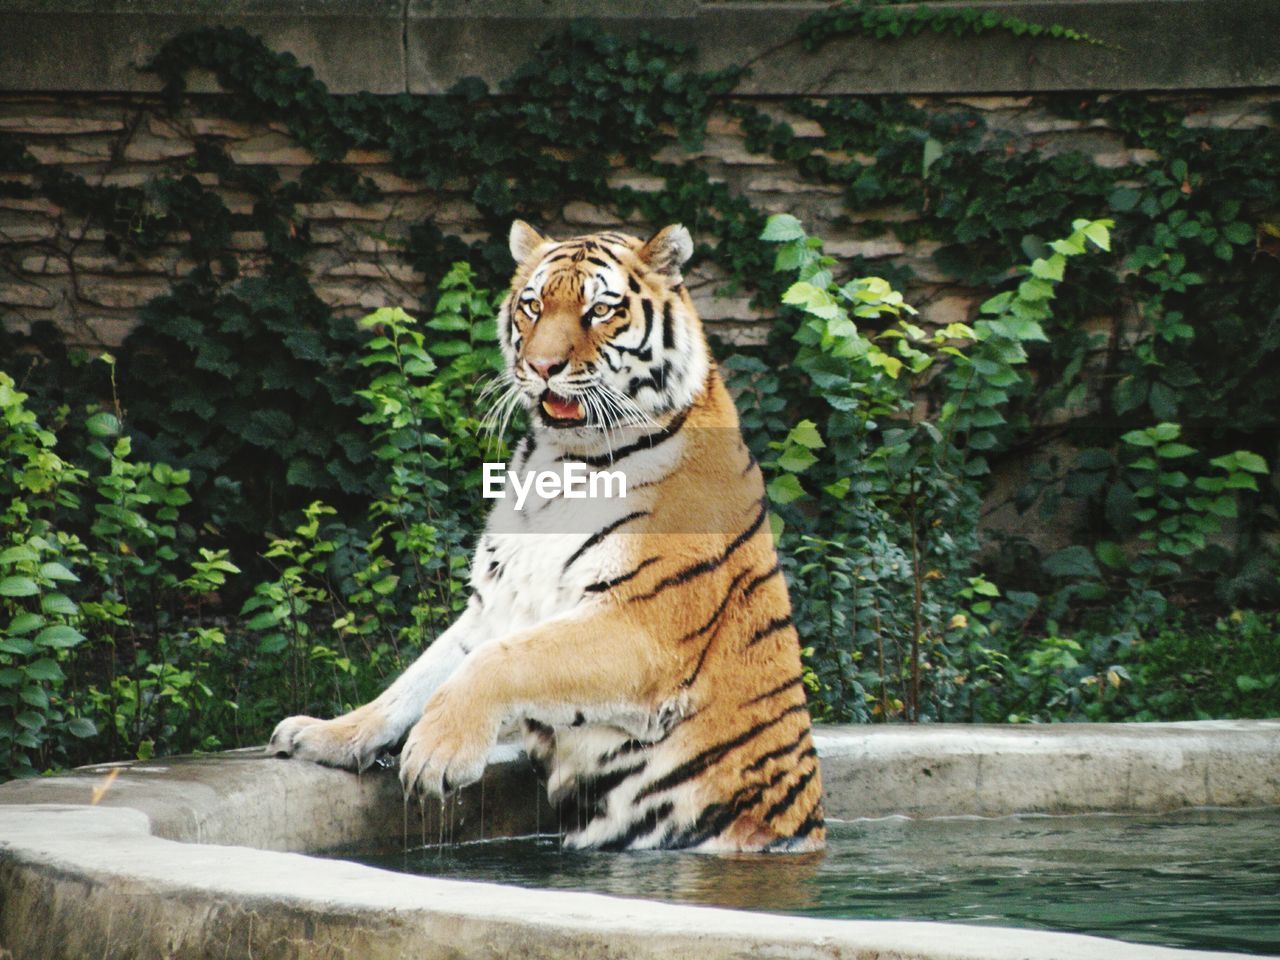 Tiger in watering hole. 